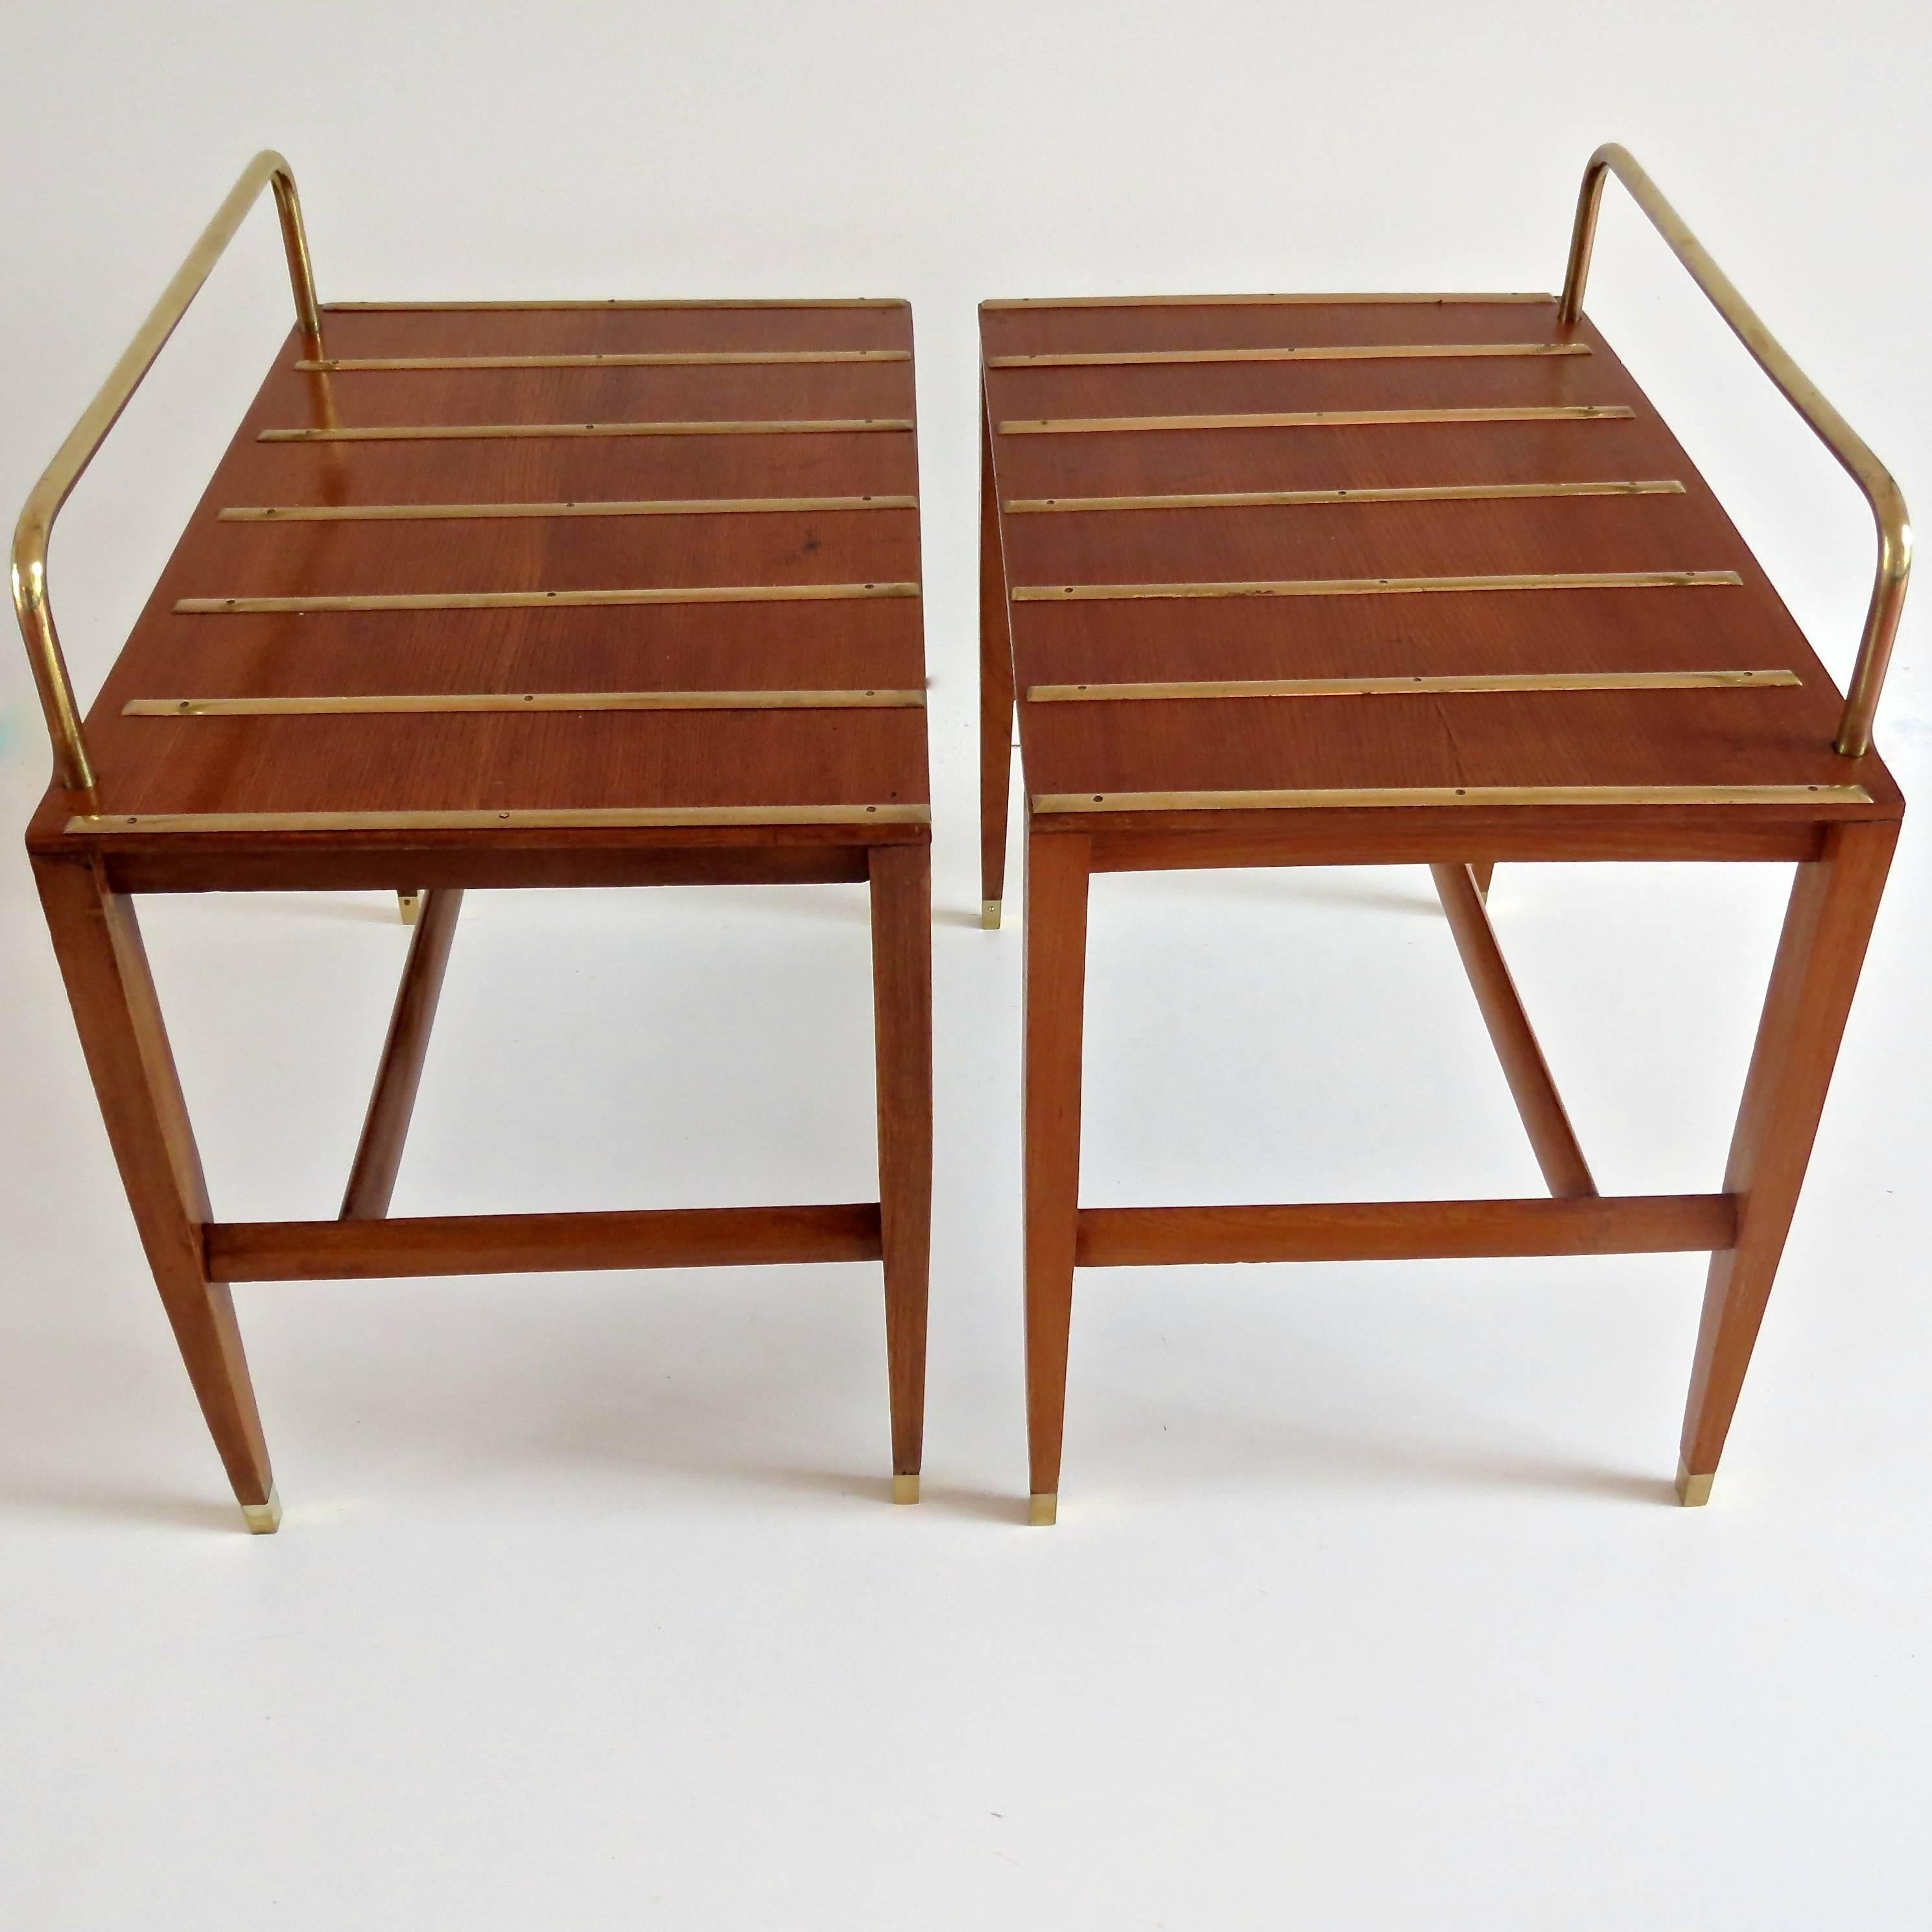 Gio Ponti side tables (stands) produced by Giordano Chiesa,
from the suite of the Hotel Royal Naples, 1955.
Italian walnut, brass. Brass details: Handles, foot and seven sections (each stand)
Measures: Height 65 cm; 65x 42 cm height without